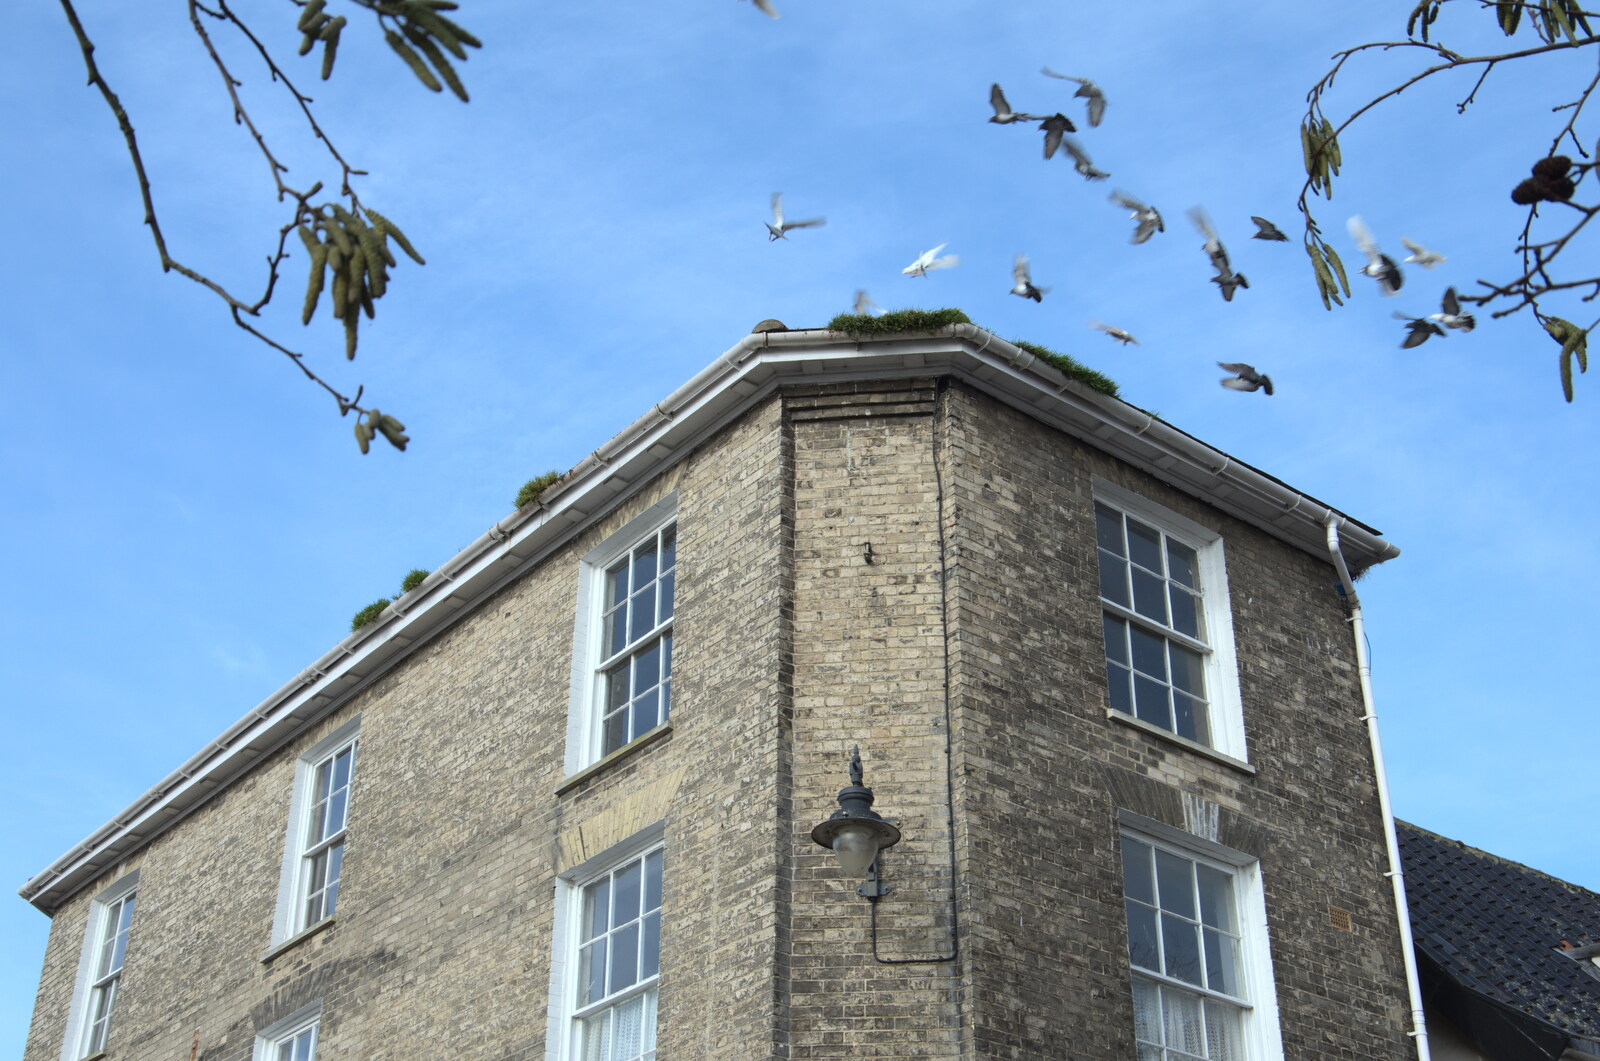 Pigeons on the roof from Snowdrops at Talconeston Hall, Tacolneston, Norfolk - 7th February 2020